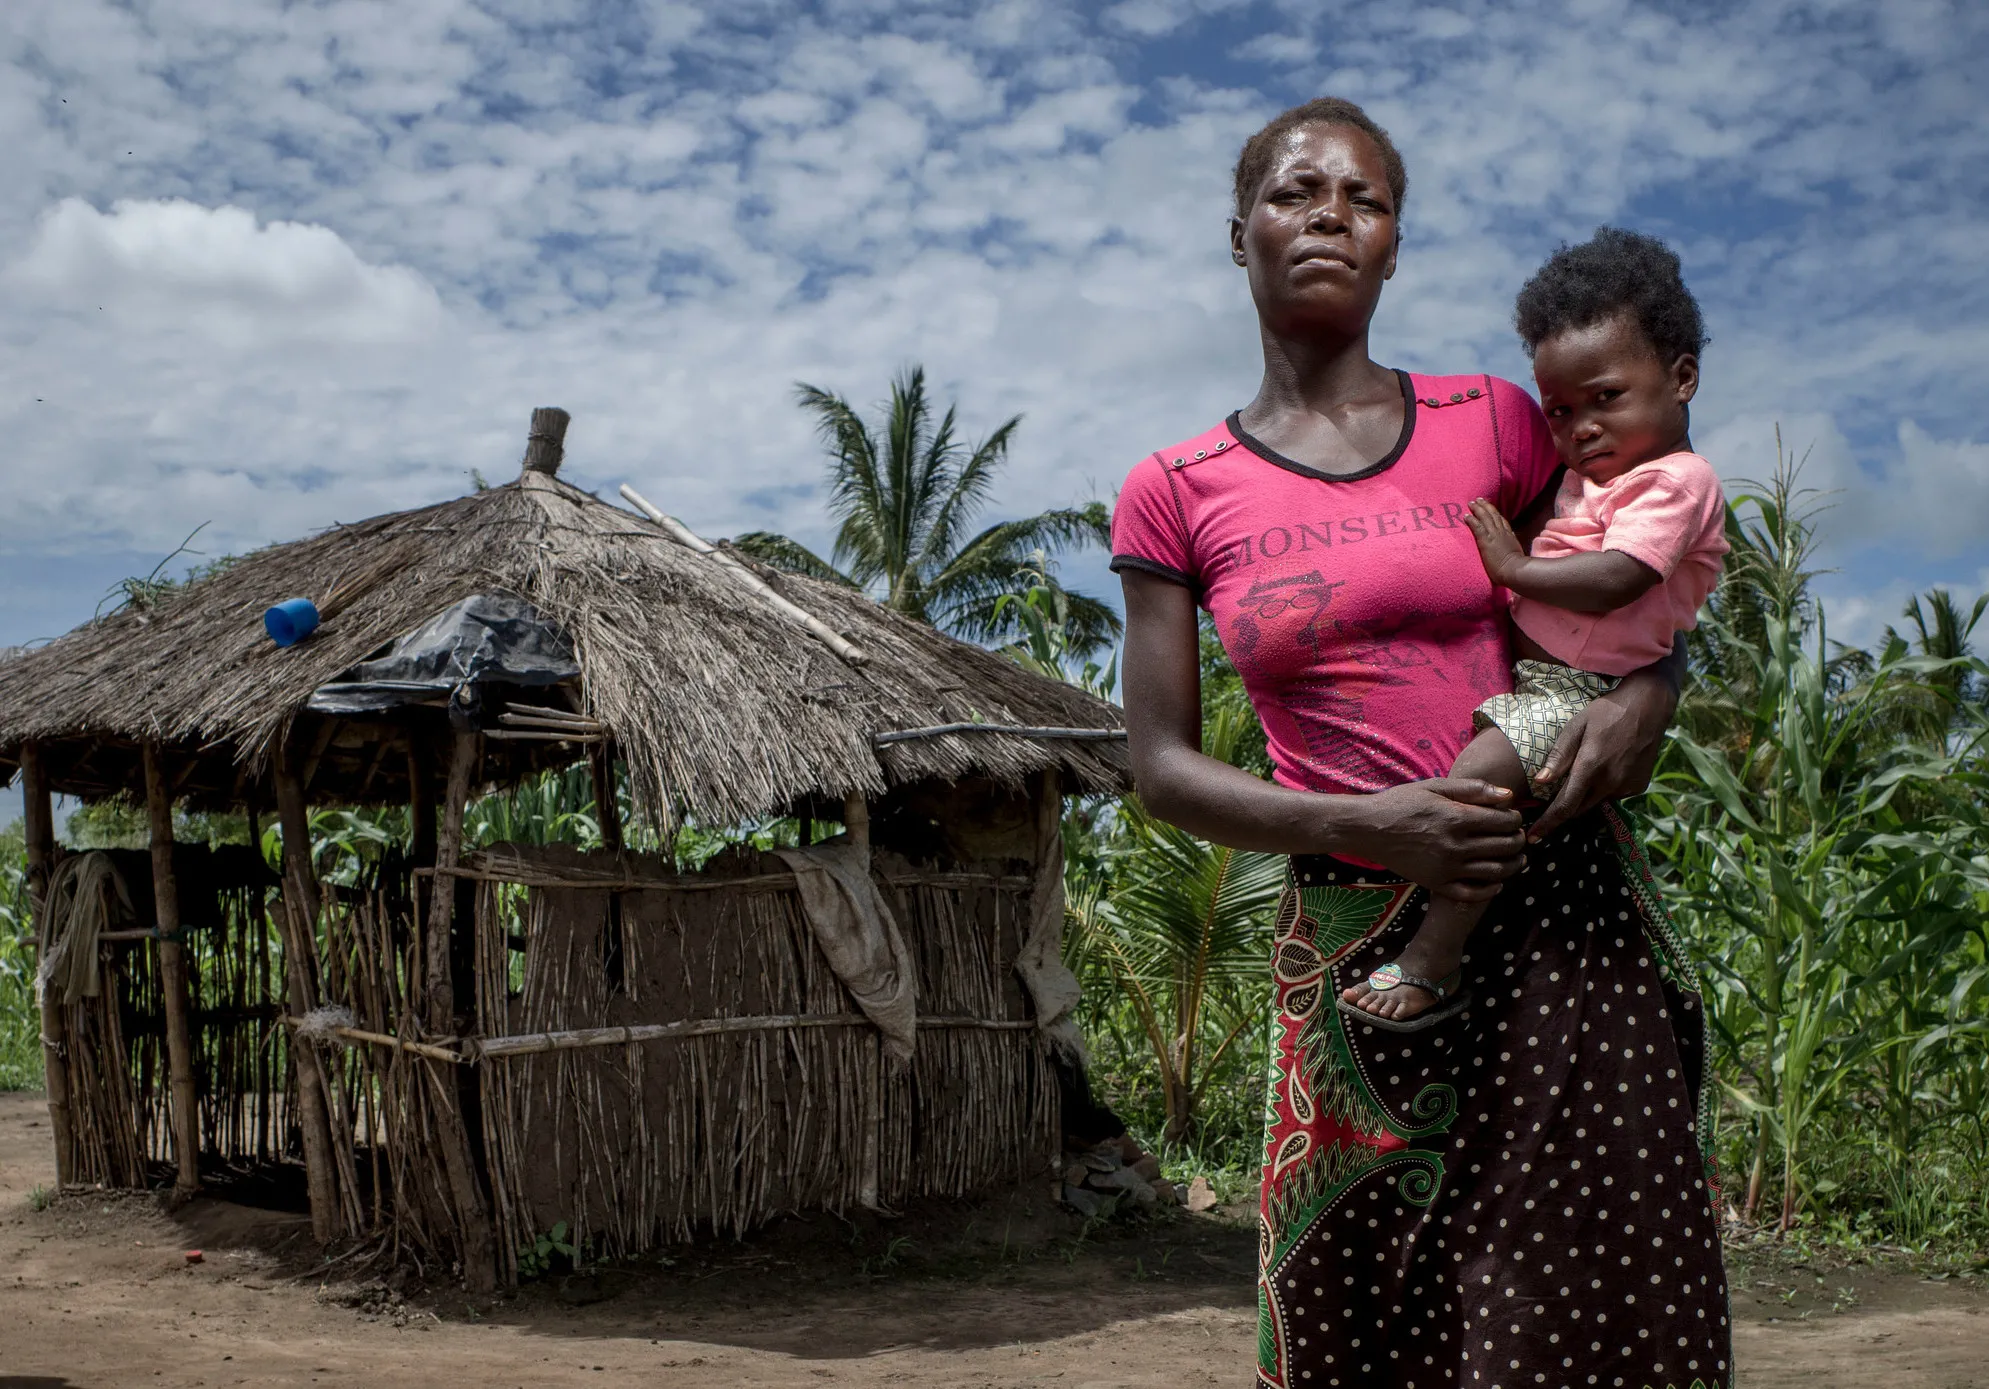 A woman holds her daughter in front of a wooden hut.